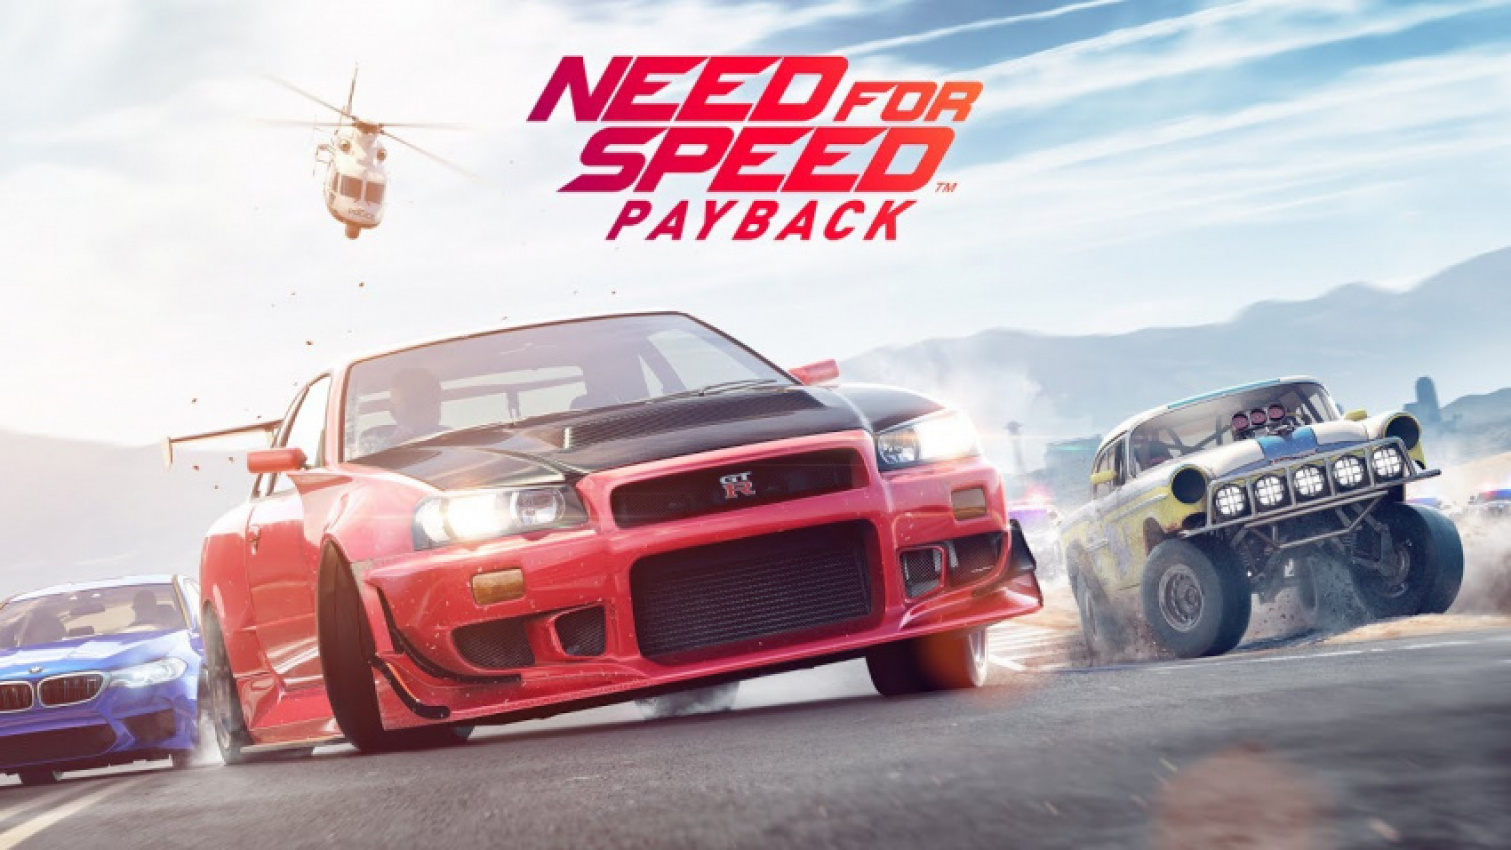 autos, cars, ea games, electronic arts, need for speed, need for speed payback pays homage to the fast & furious movies